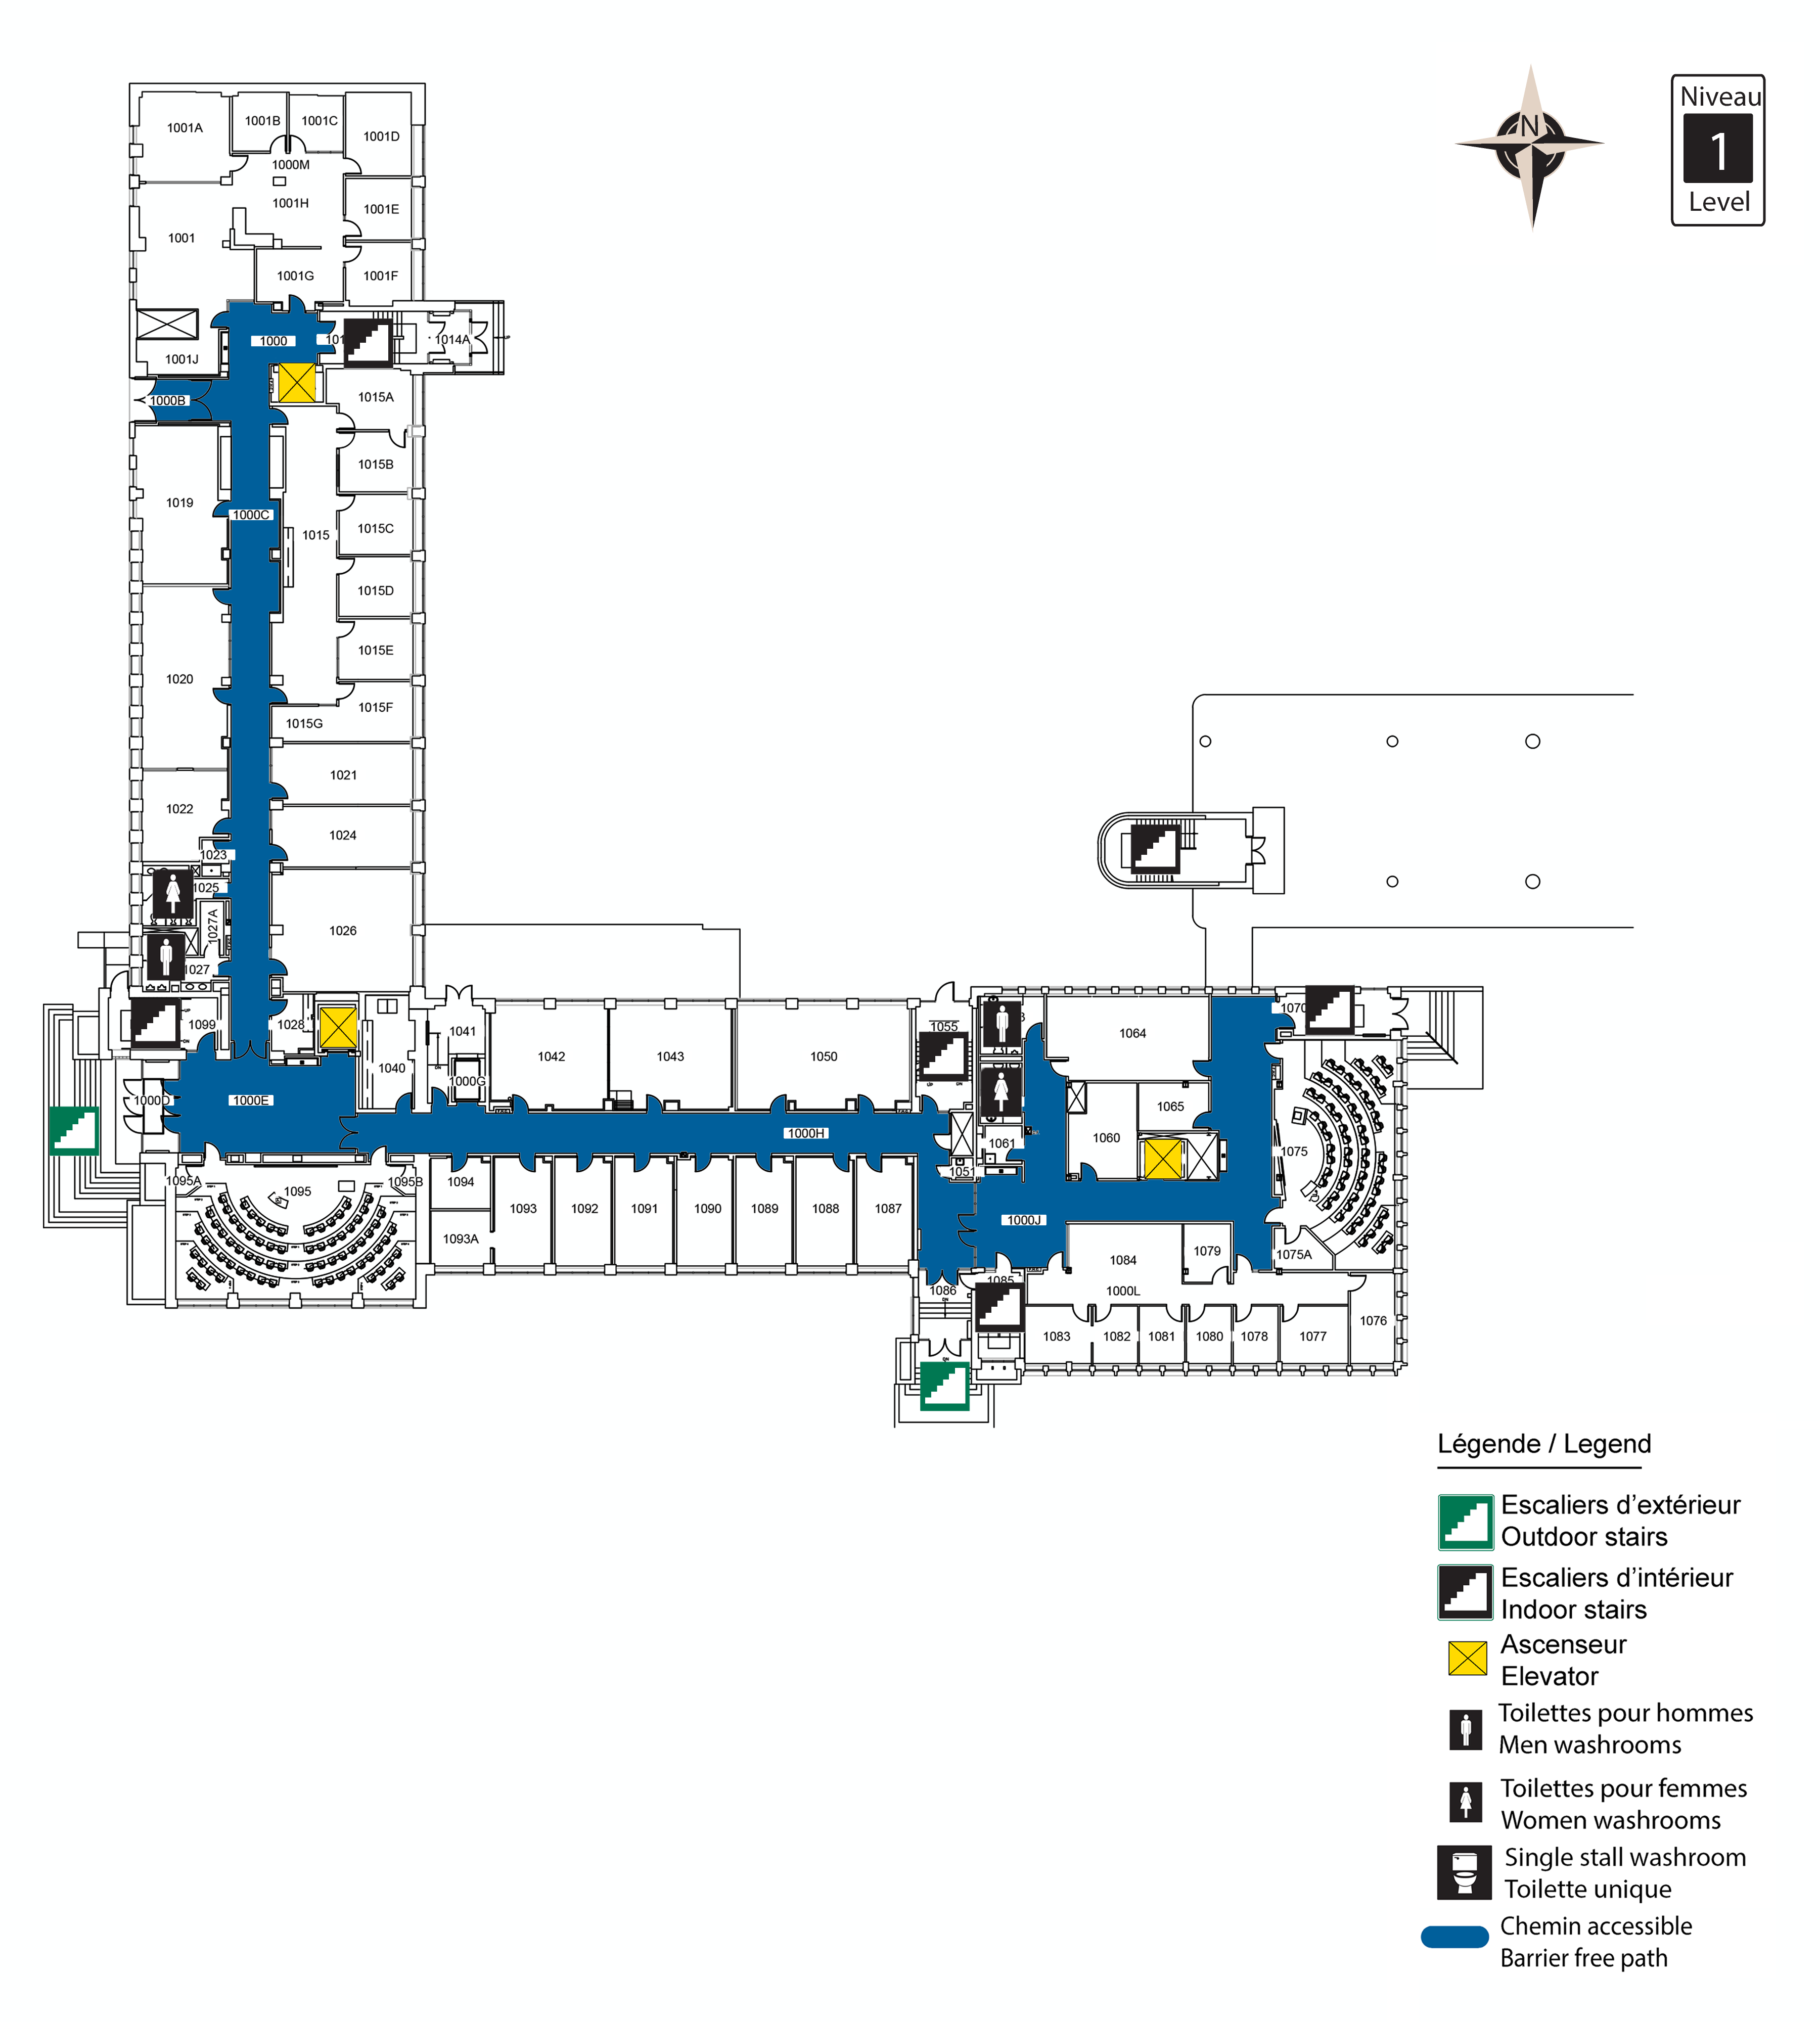 Accessible map of VNR level 1